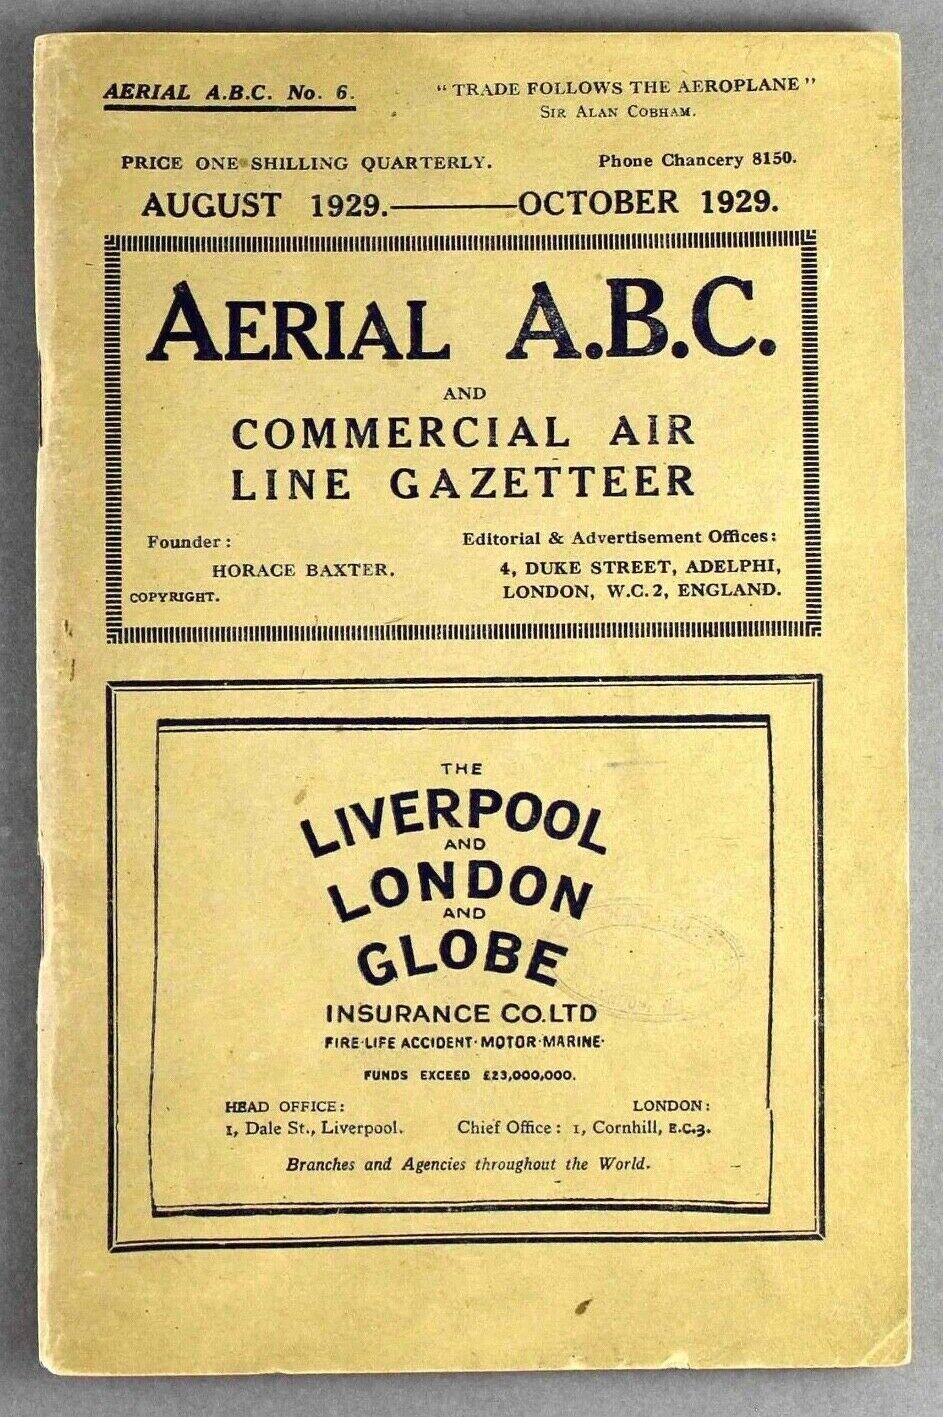 AERIAL ABC COMMERCIAL AIRLINE TIMETABLE AUGUST 1929 IMPERIAL AIRWAYS 